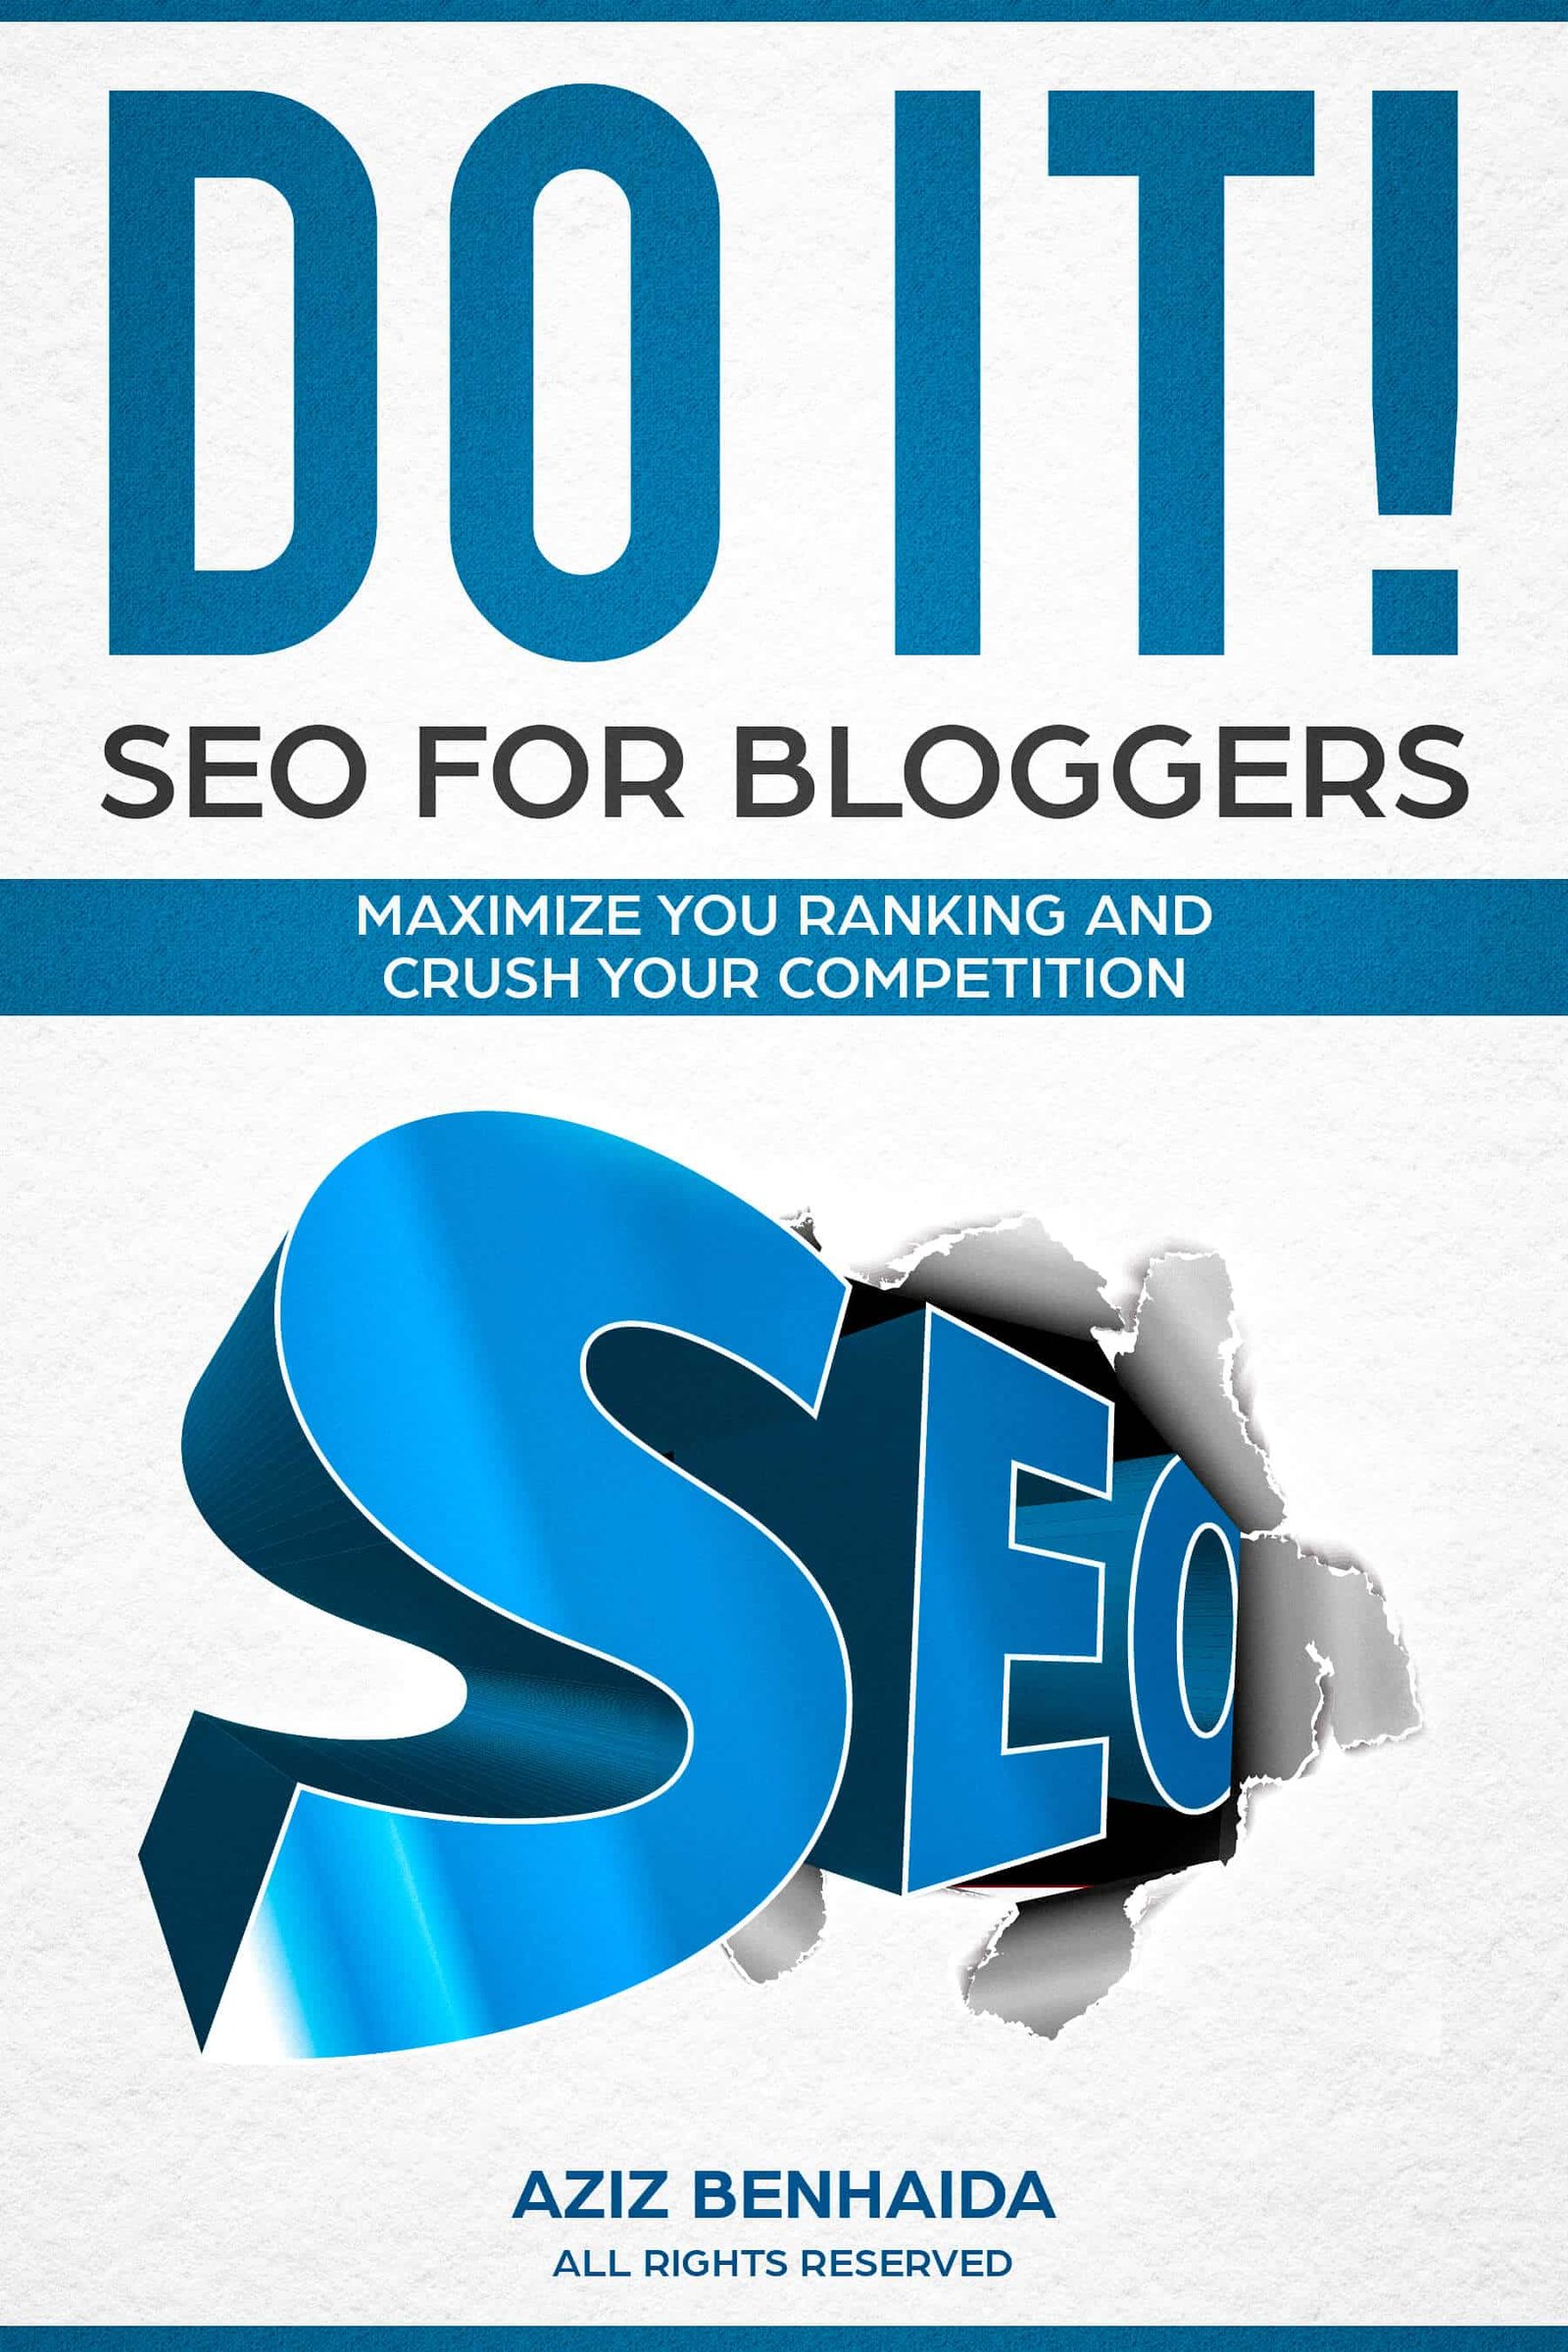 SEO for Bloggers Ebook